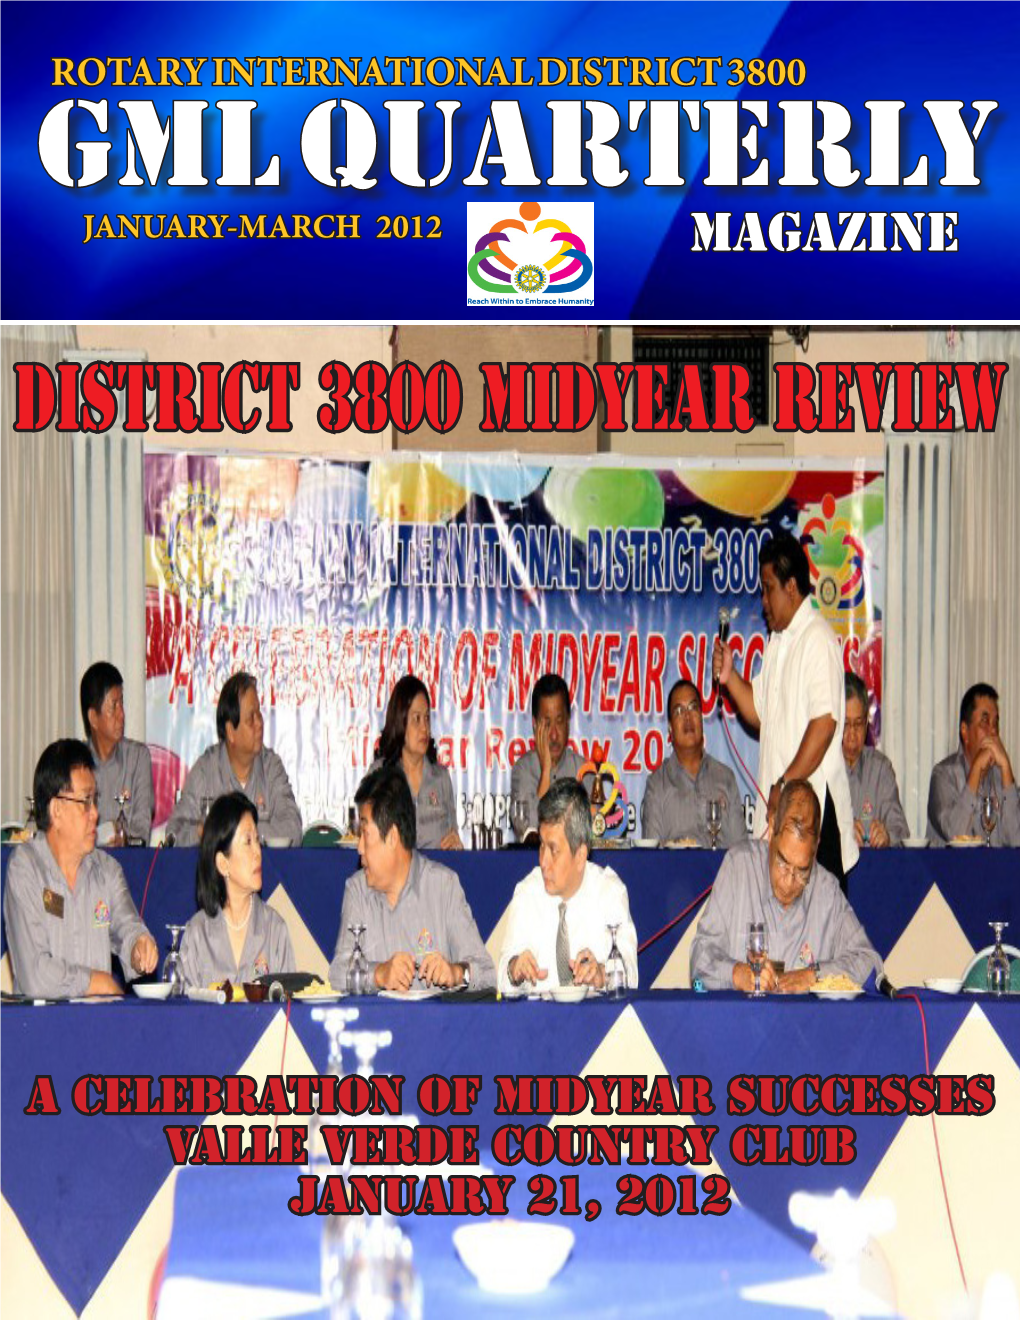 GML QUARTERLY JANUARY-MARCH 2012 Magazine District 3800 MIDYEAR REVIEW